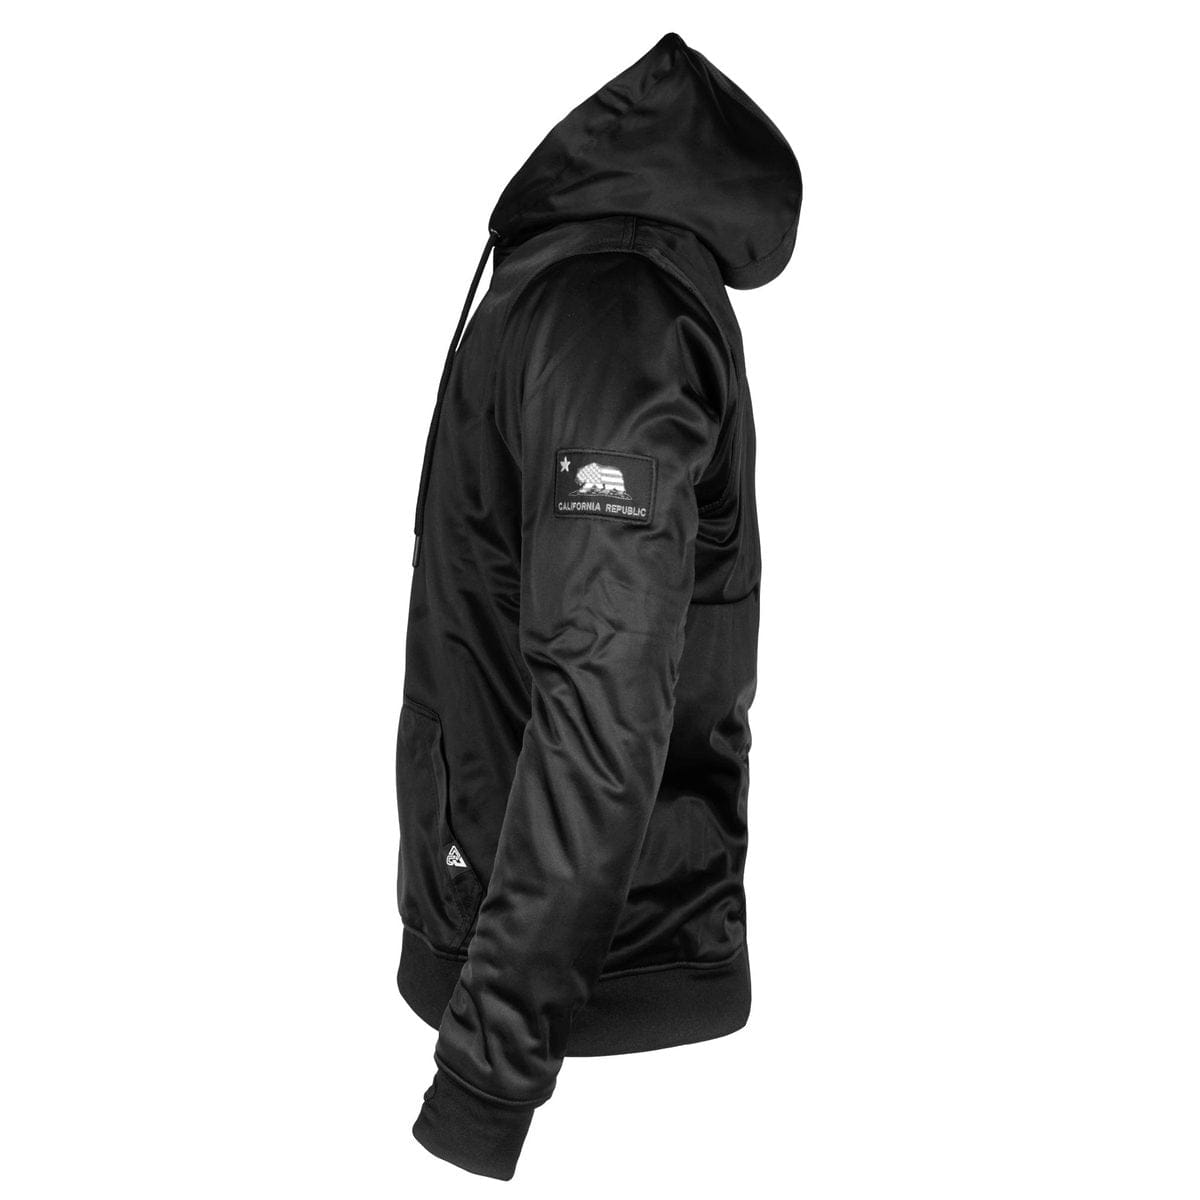 Ultra Protective Hoodie with Pads - Black Solid